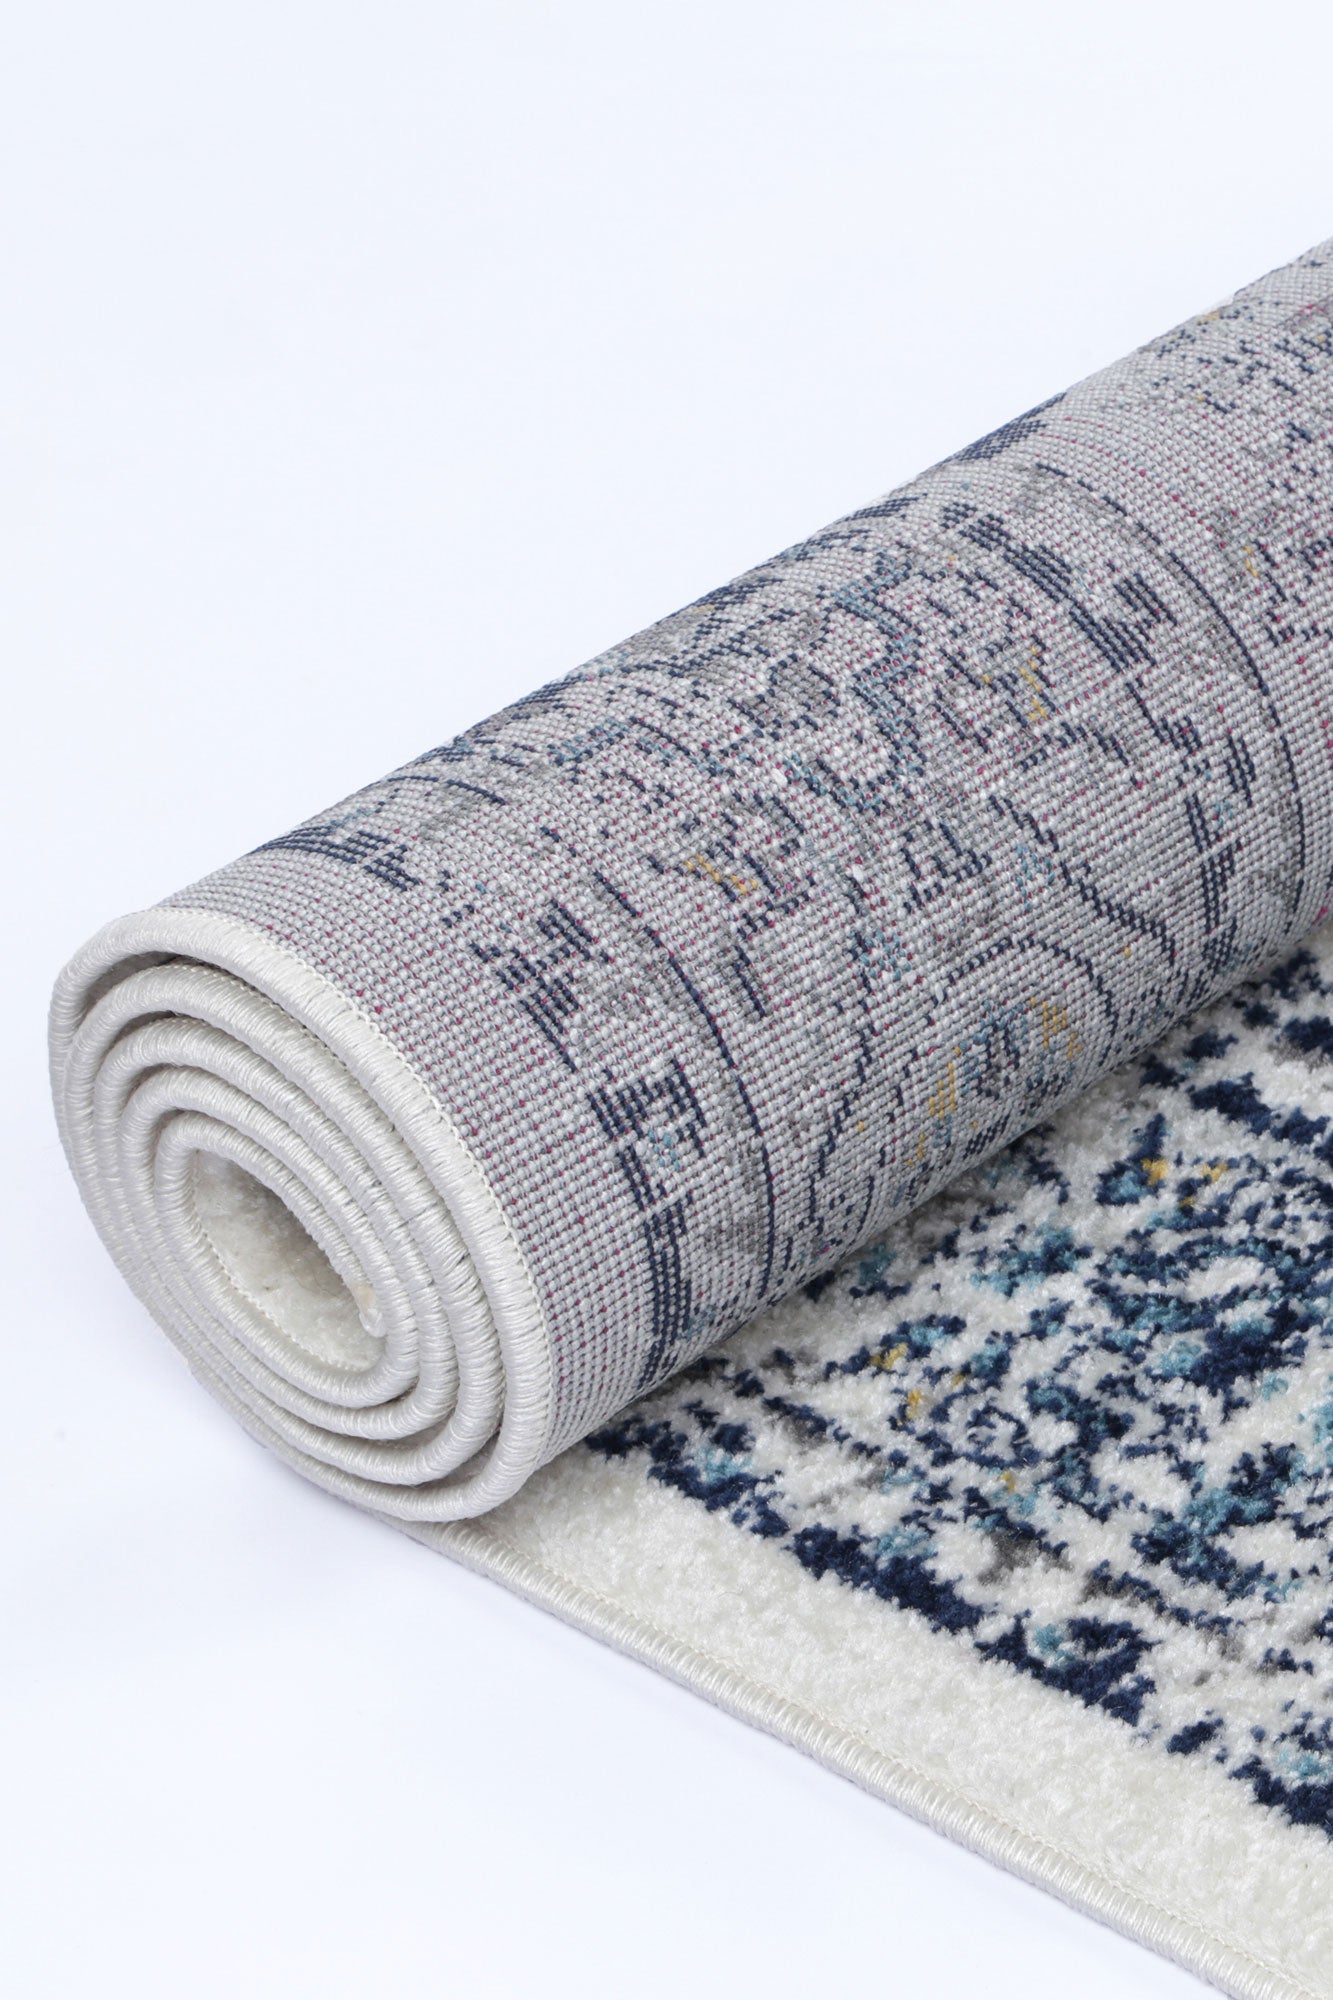 Provence Gruissan Blue & Ivory Transitional Rug